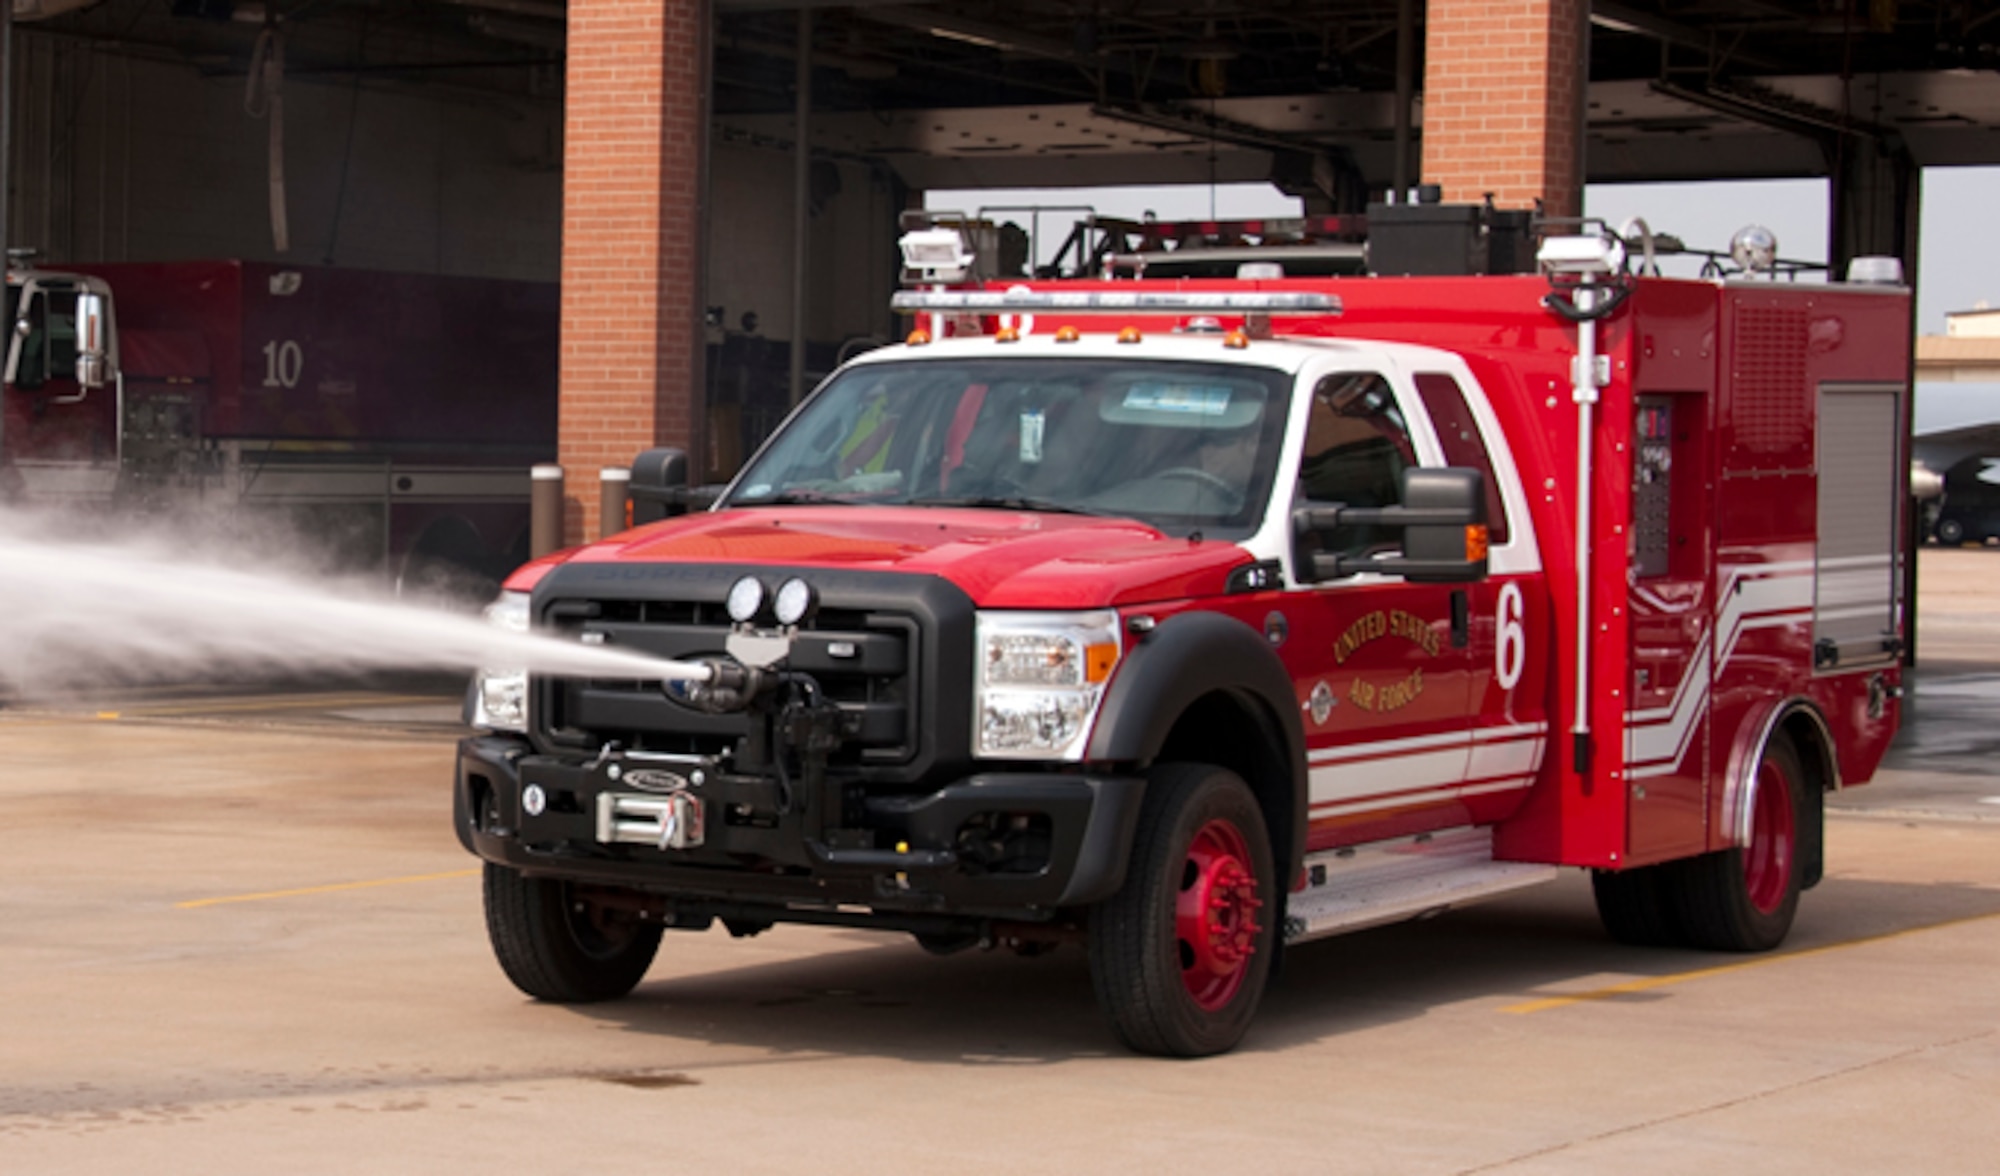 Firefighter Carl Lamb demonstrates the ultra high pressure turret mounted on the front of the bumper of a P-34 Rapid Intervention Vehicle (RIV) July 12, 2012 at Sheppard Air Force Base, Texas. The P 34 is the newest addition to the Air Force crash response fleet.